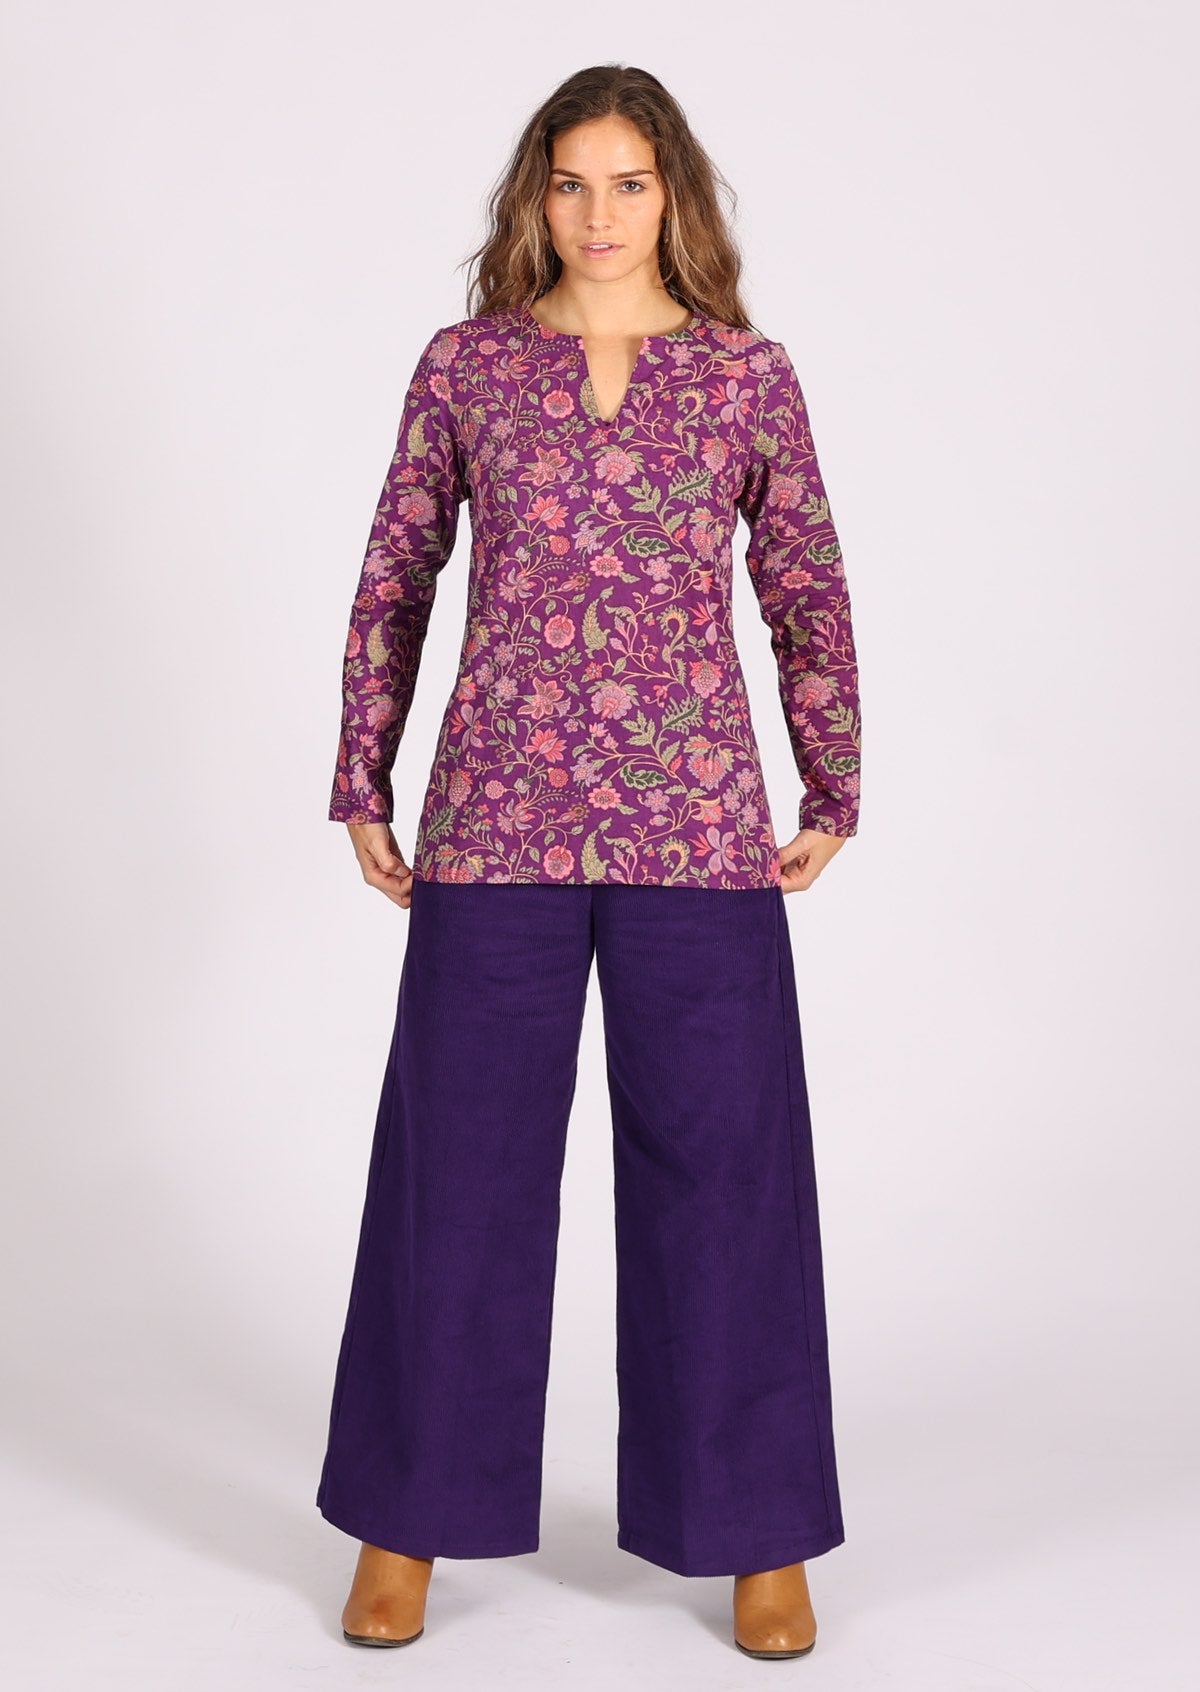 Long bodied cotton top with long sleeves and V cutout neckline